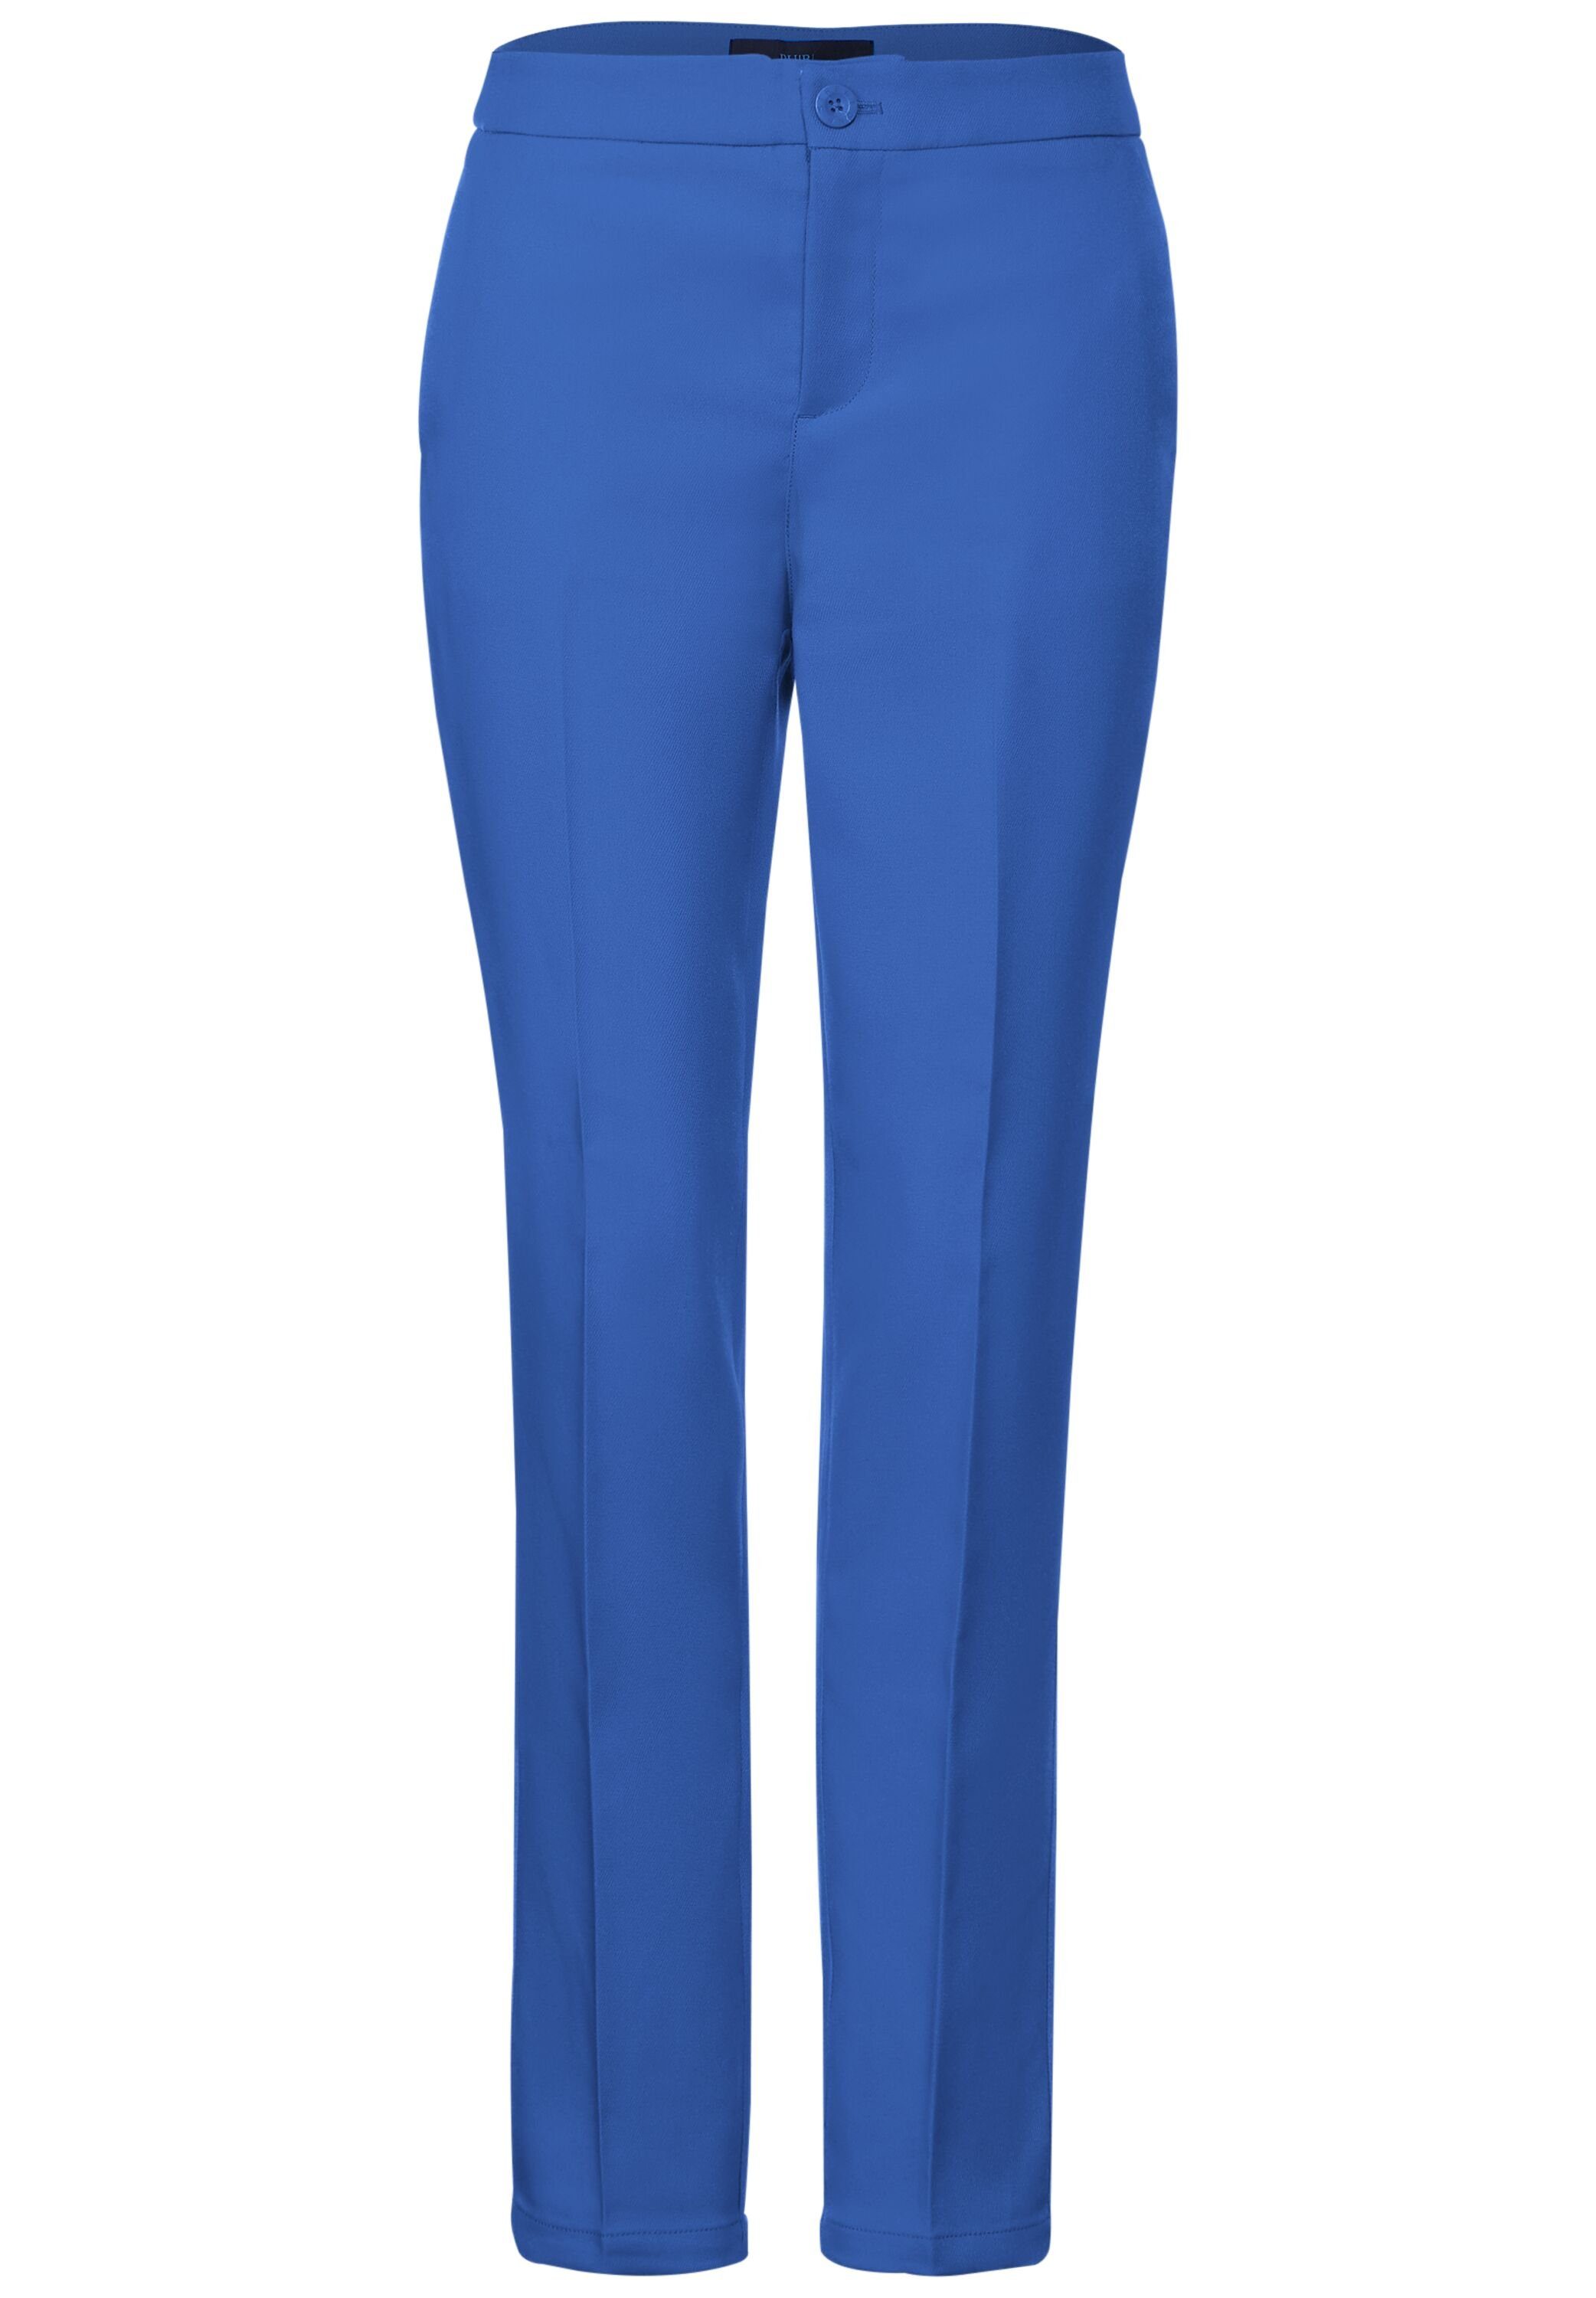 Pants gentle Fit STREET im fresh blue ONE Twill Stoffhose intense Solid Loose